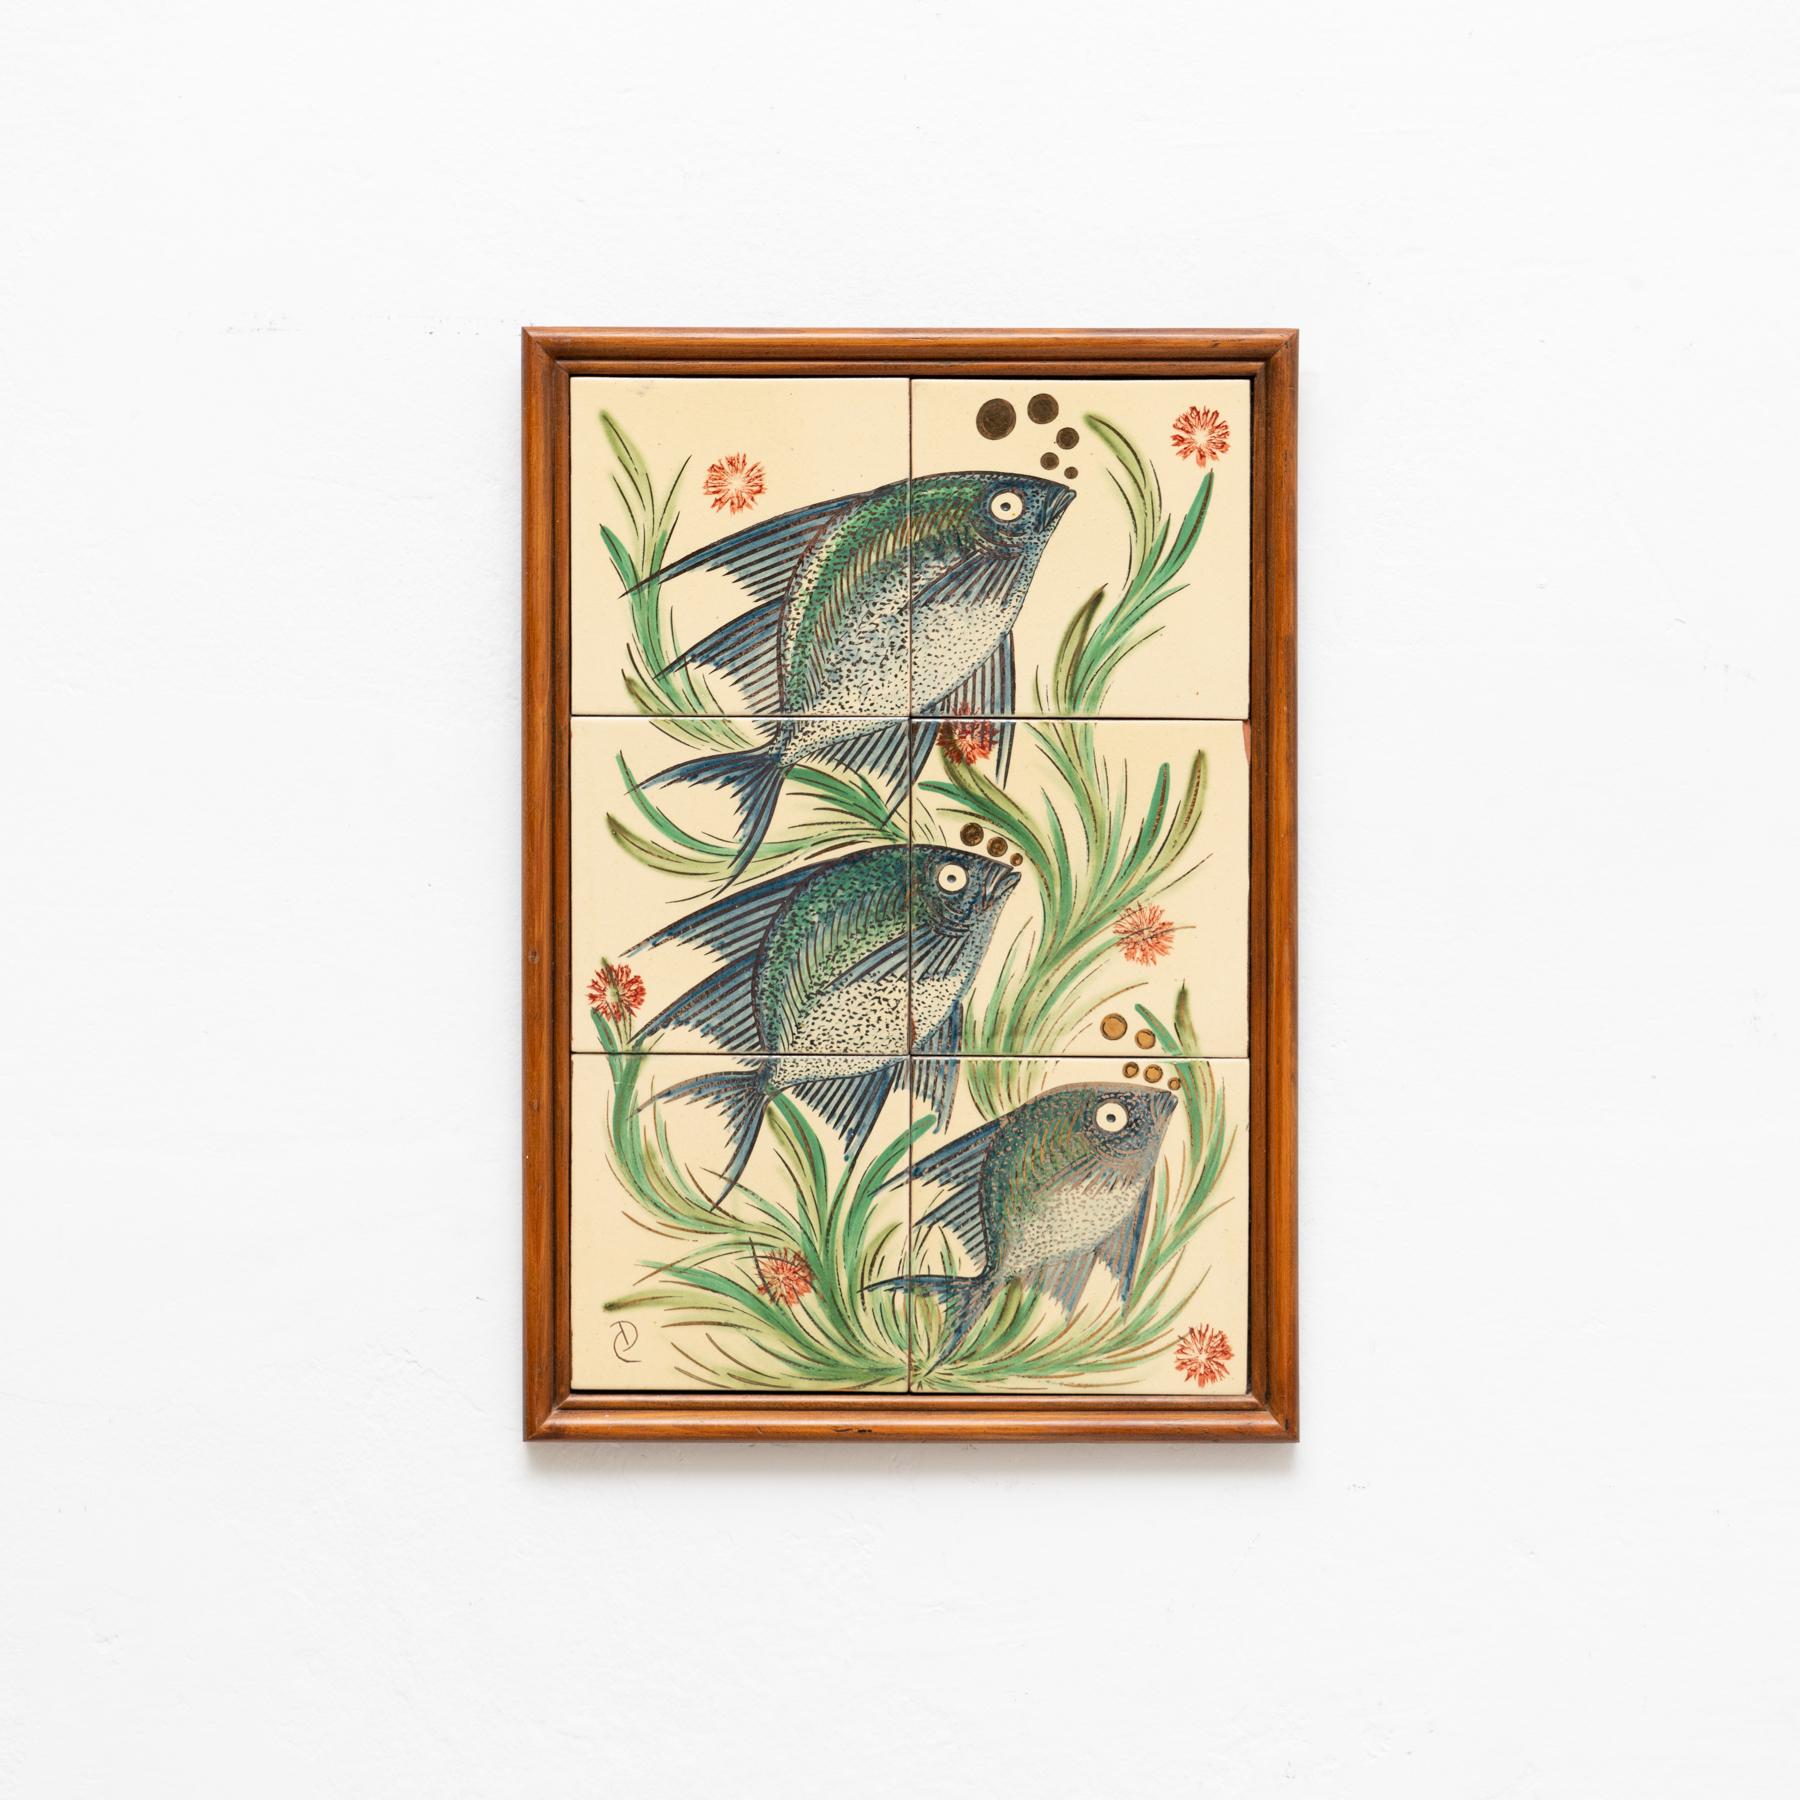 Ceramic hand painted artwork of three fishes by Catalan artist Diaz Costa, circa 1960.
Framed. Signed.

In original condition, with minor wear consistent of age and use, preserving a beautiul patina.